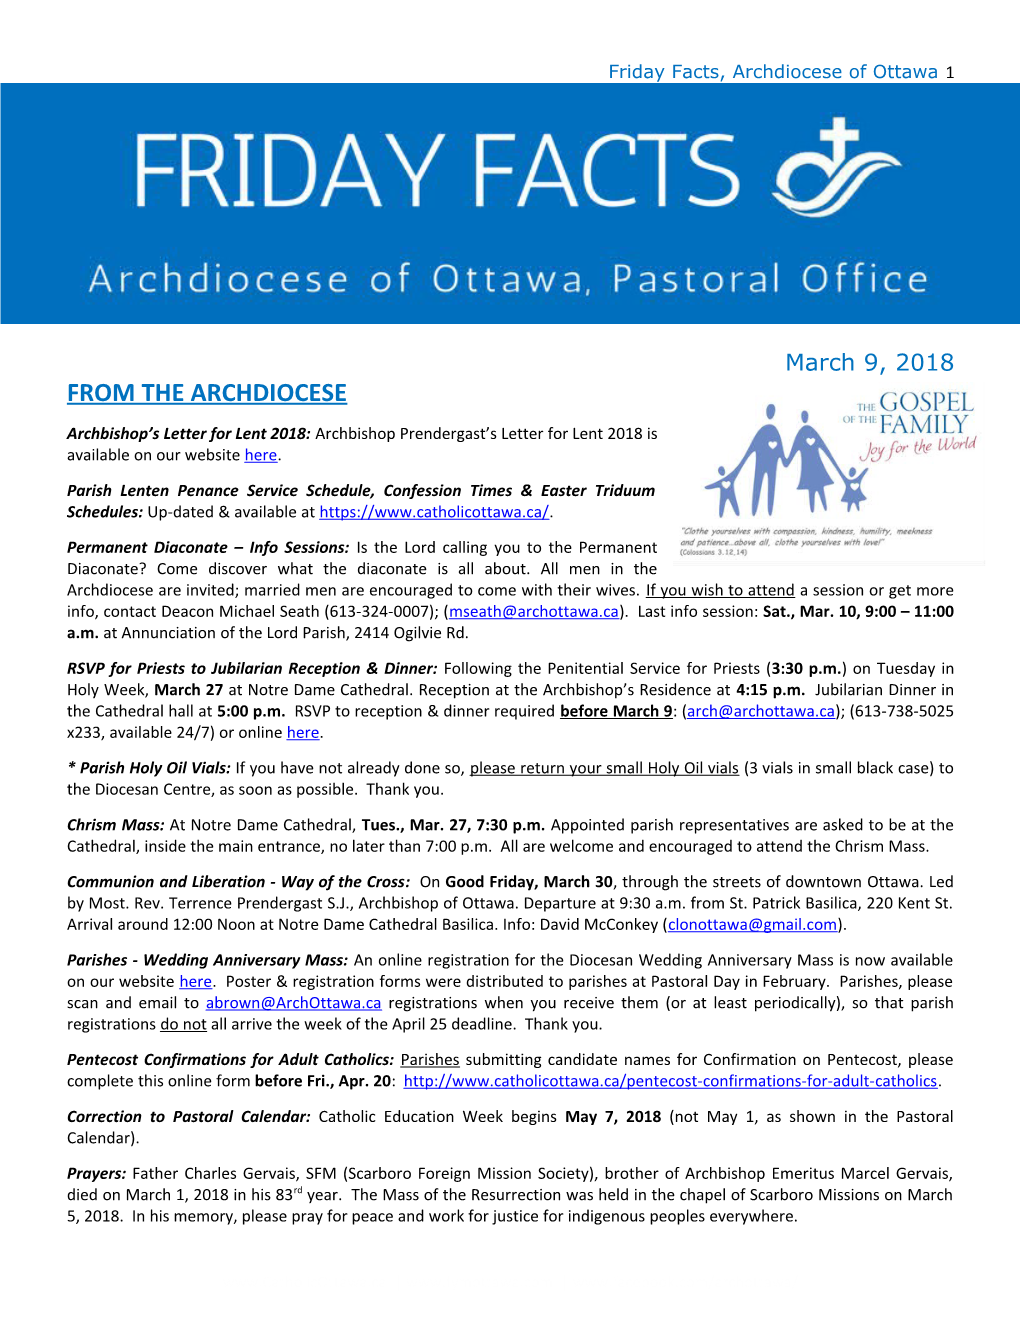 Friday Facts, Archdiocese of Ottawa1